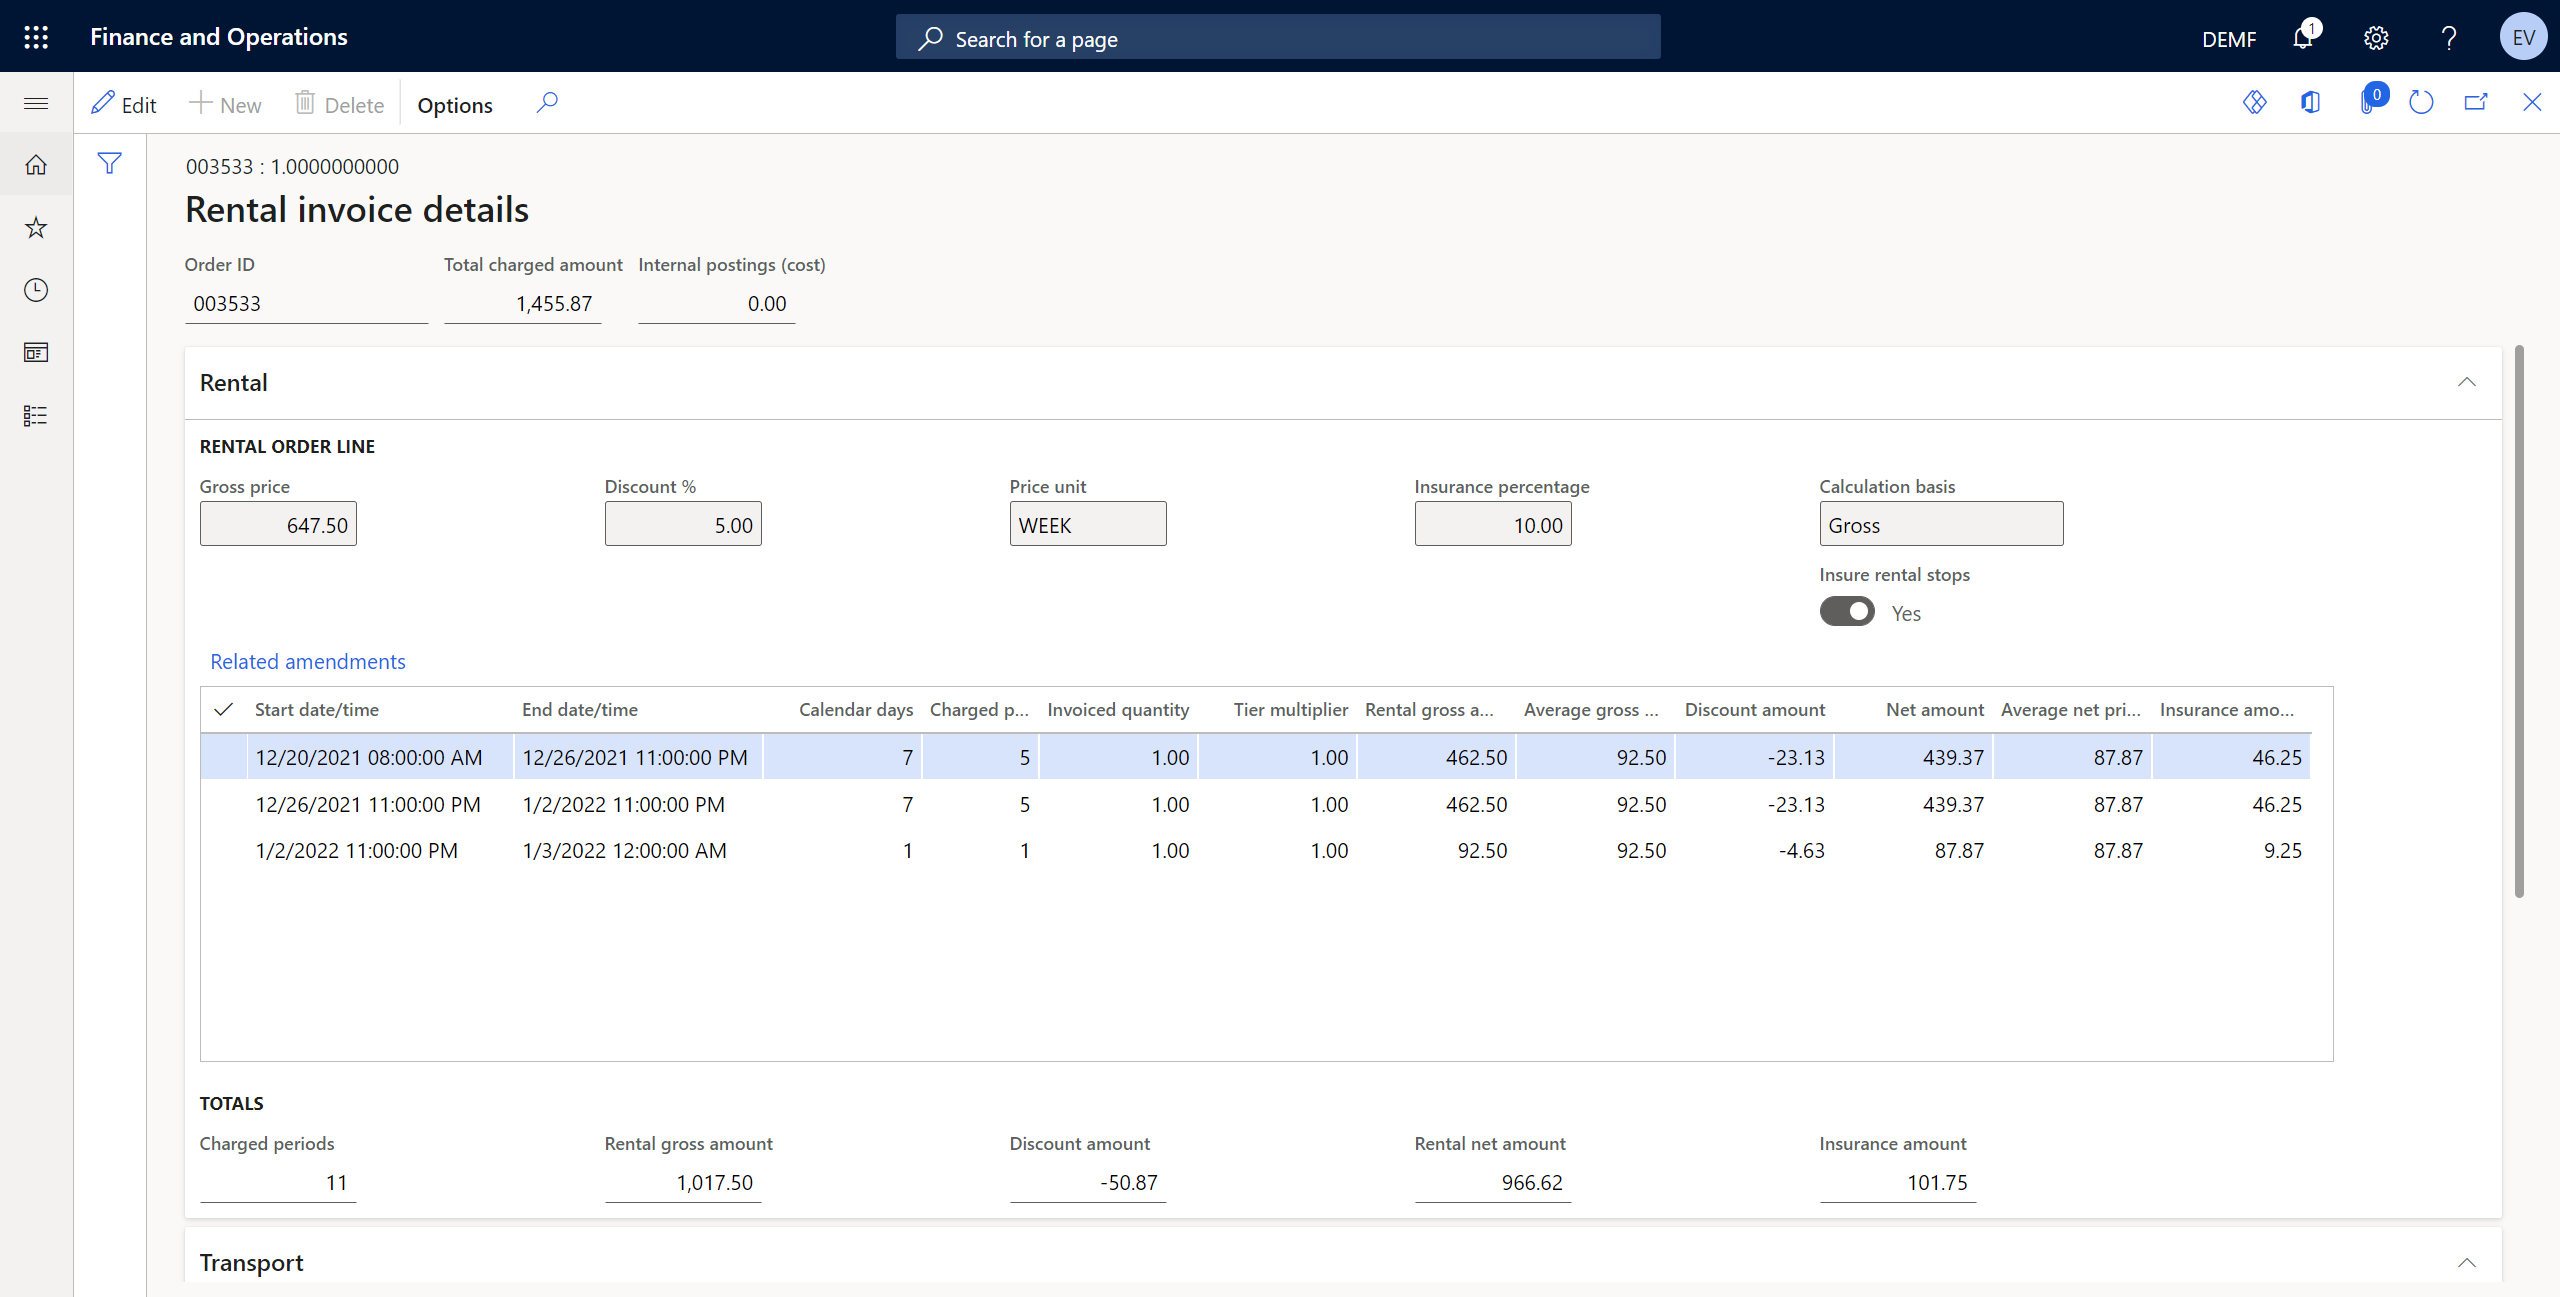 DynaRent solution screenshot displaying the rental invoice details in F&SCM environment.